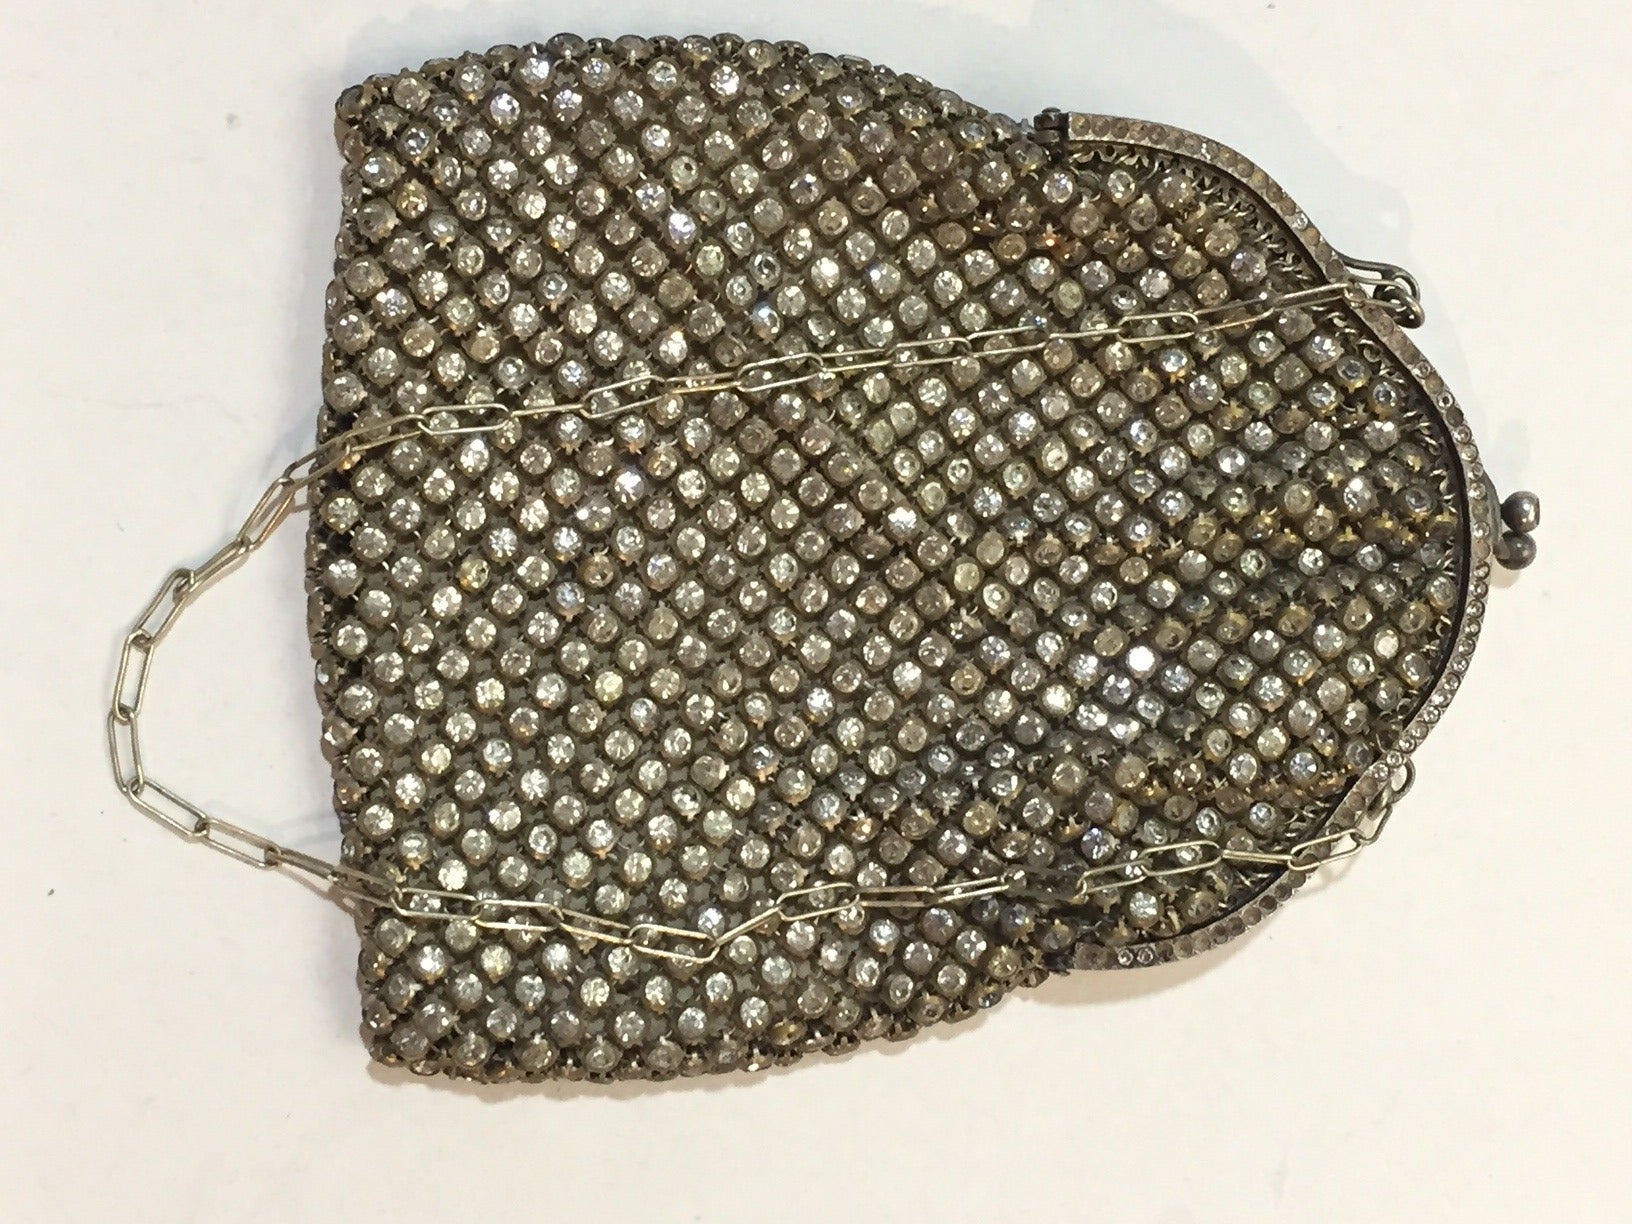 A gorgeous 1920s Art Deco metal mesh evening bag completely covered in bezel-set rhinestones.  Original lining in good but slightly marked condition. 

Small stones missing on metal frame and clasp, but all present on mesh. 

Chain handle is 14